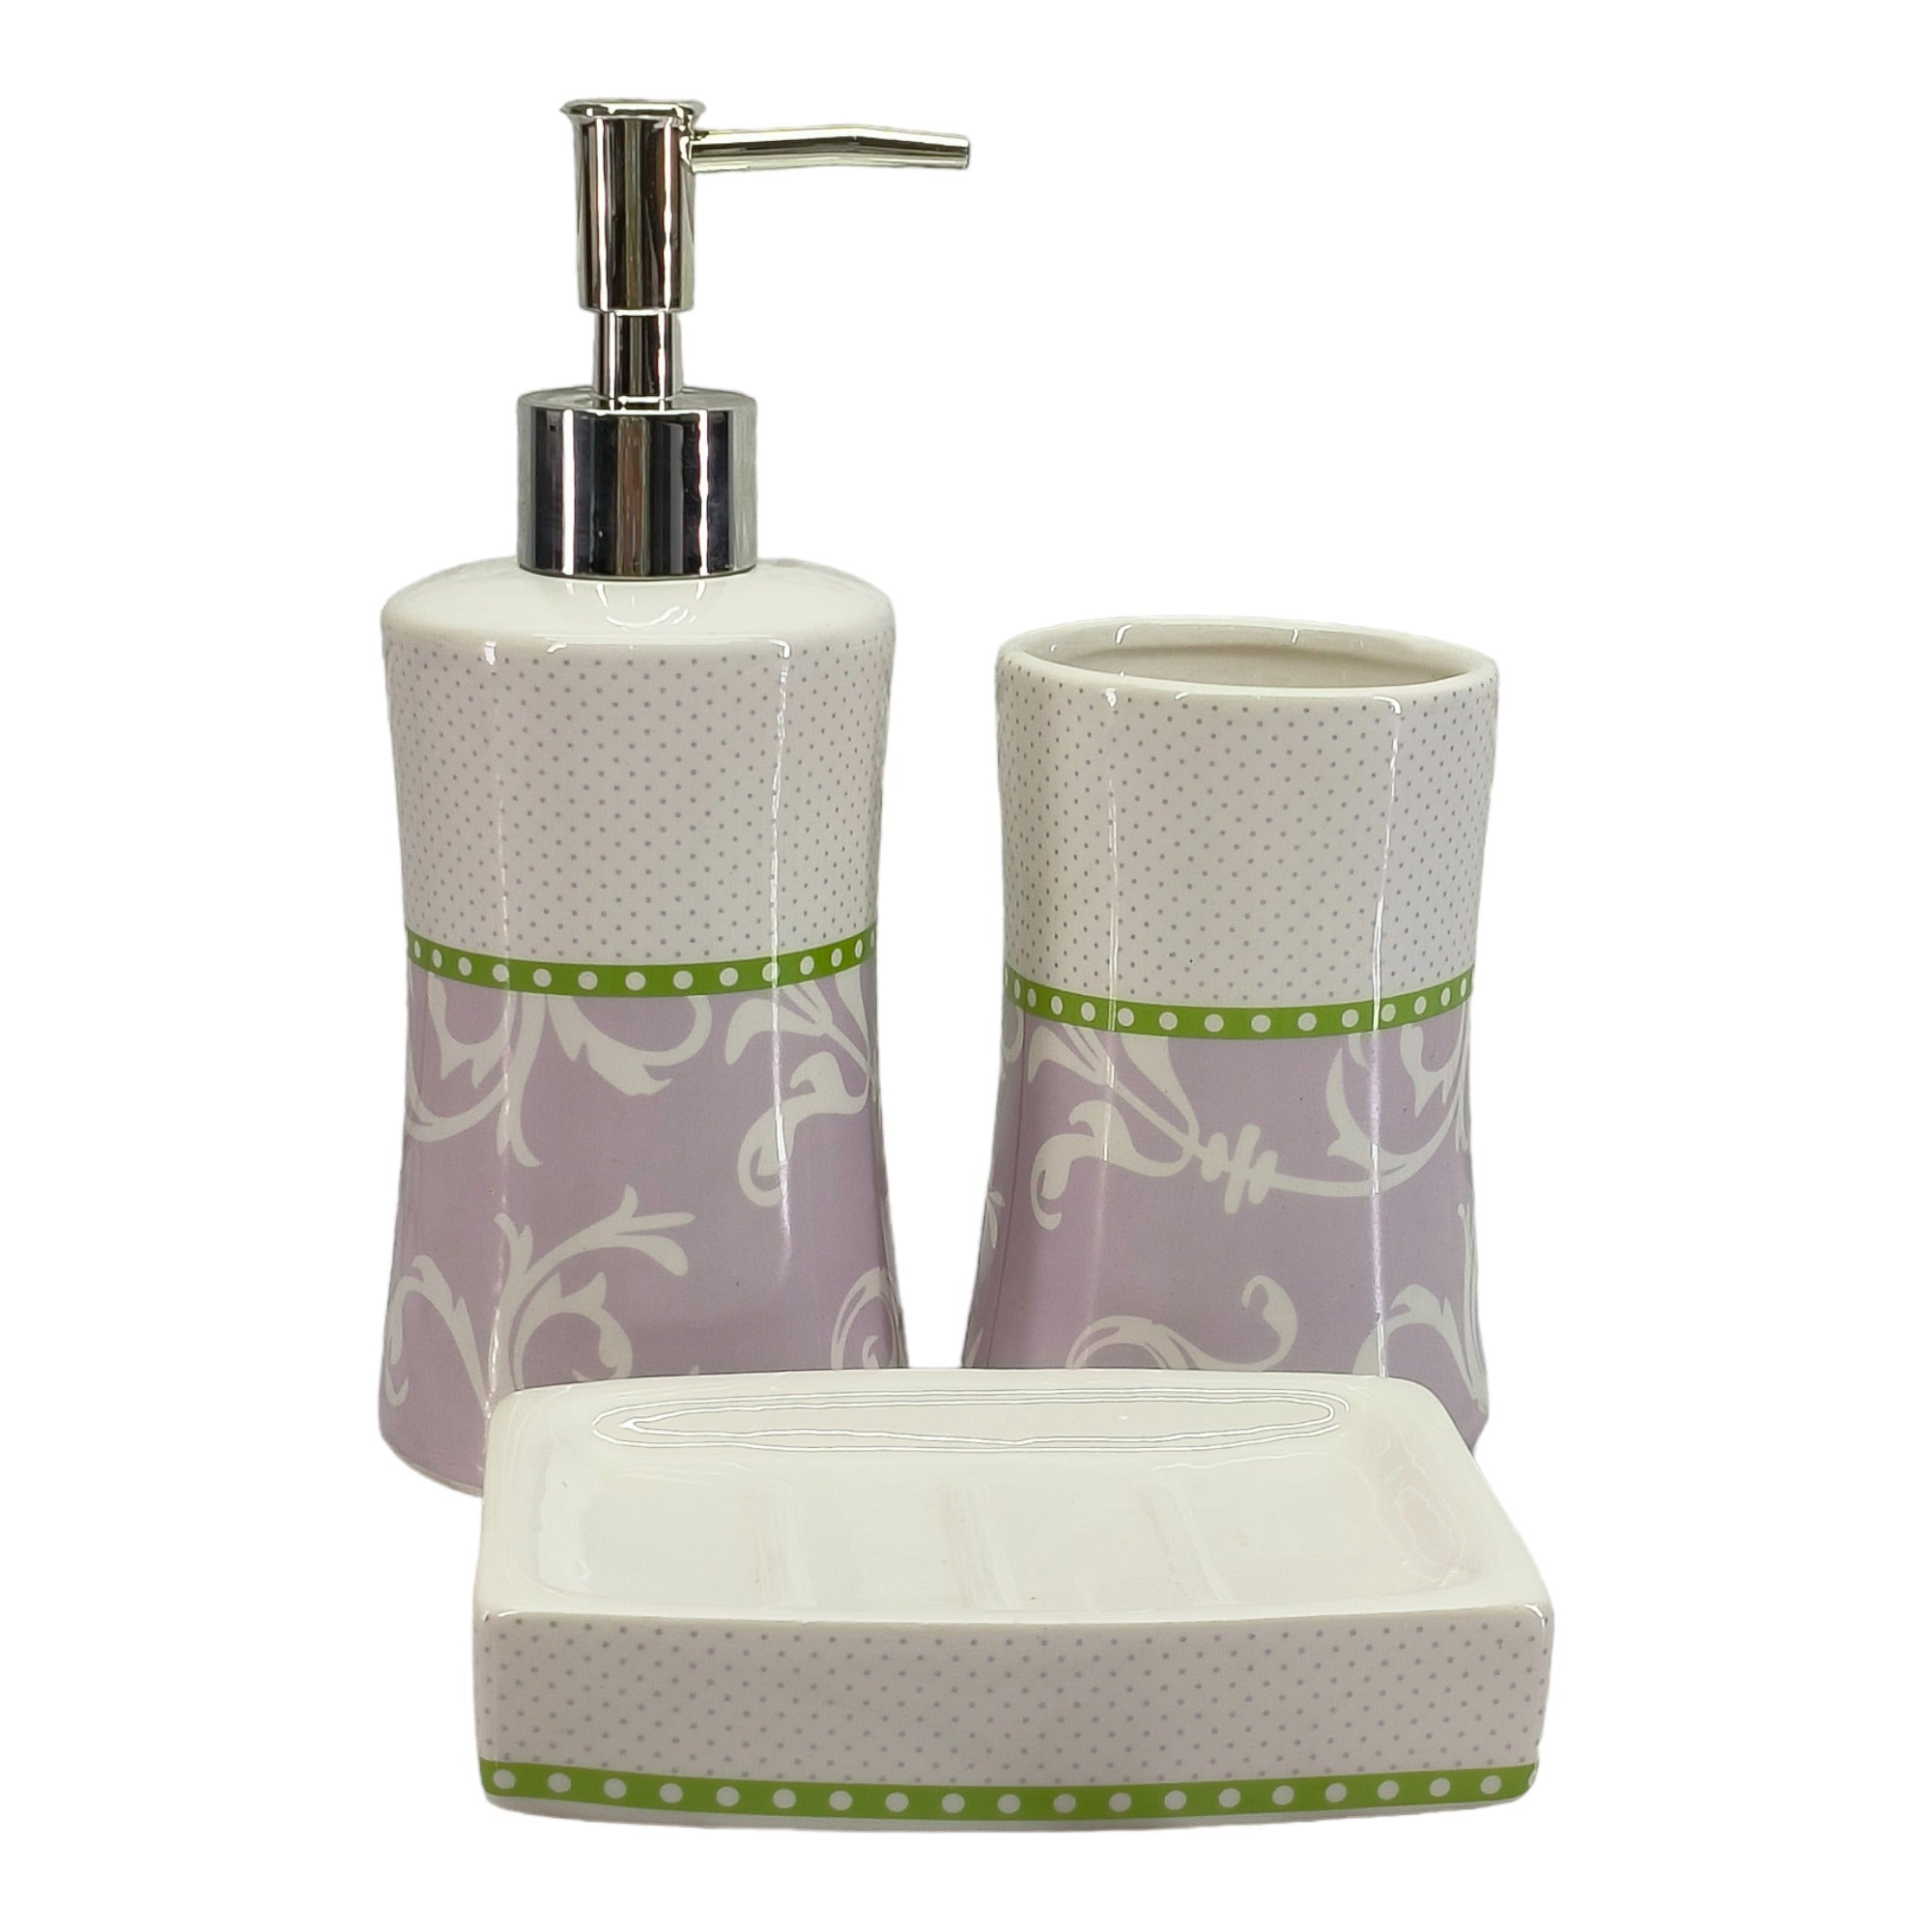 Ceramic Soap Dispenser Set with Toothbrush Holder and Soap Dish, Set of 3 Bathroom Accessories for Home (C3120)